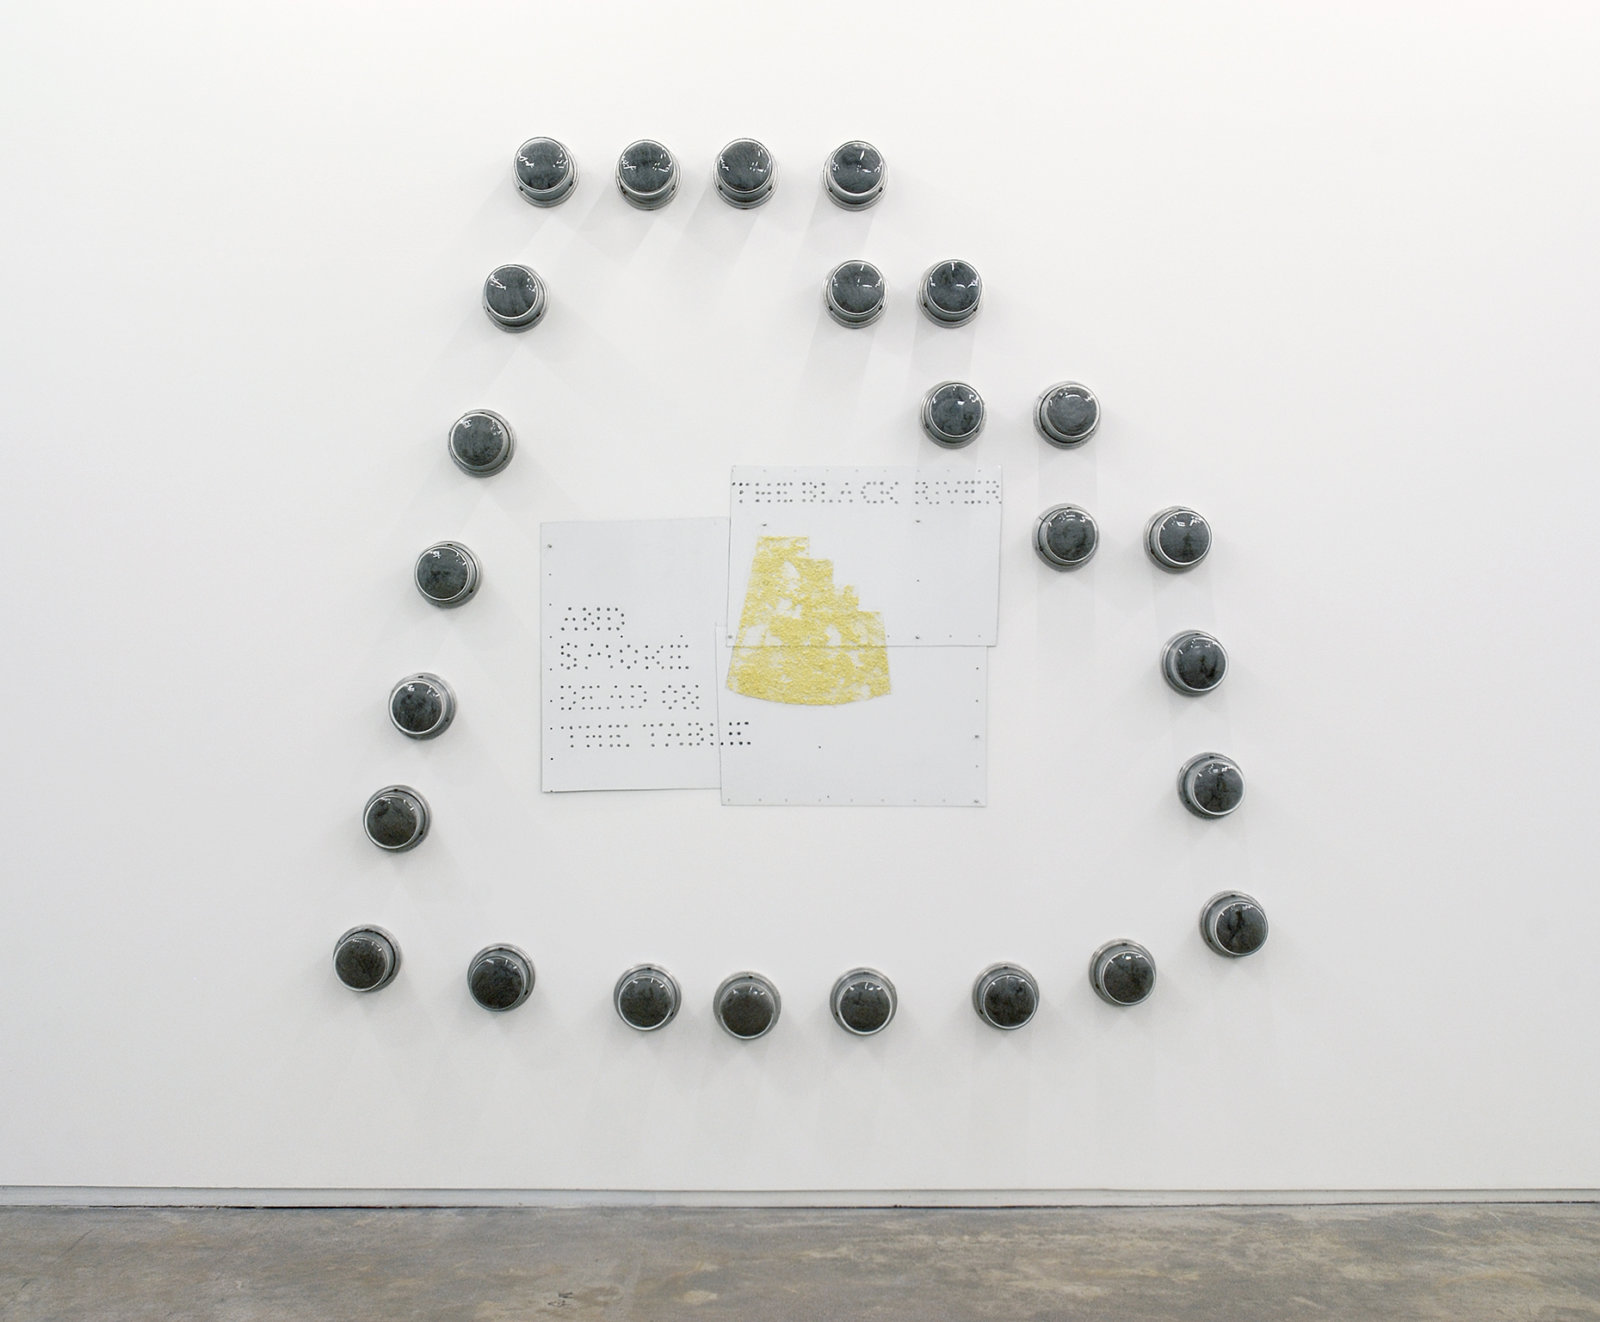 Jerry Pethick, The Last View, 1989, 22 meter covers, steel wool, aluminum, graphite, sulphur, aluminum push-pins, enamelled steel, 106 x 95 x 5 in. (270 x 240 x 12 cm)  